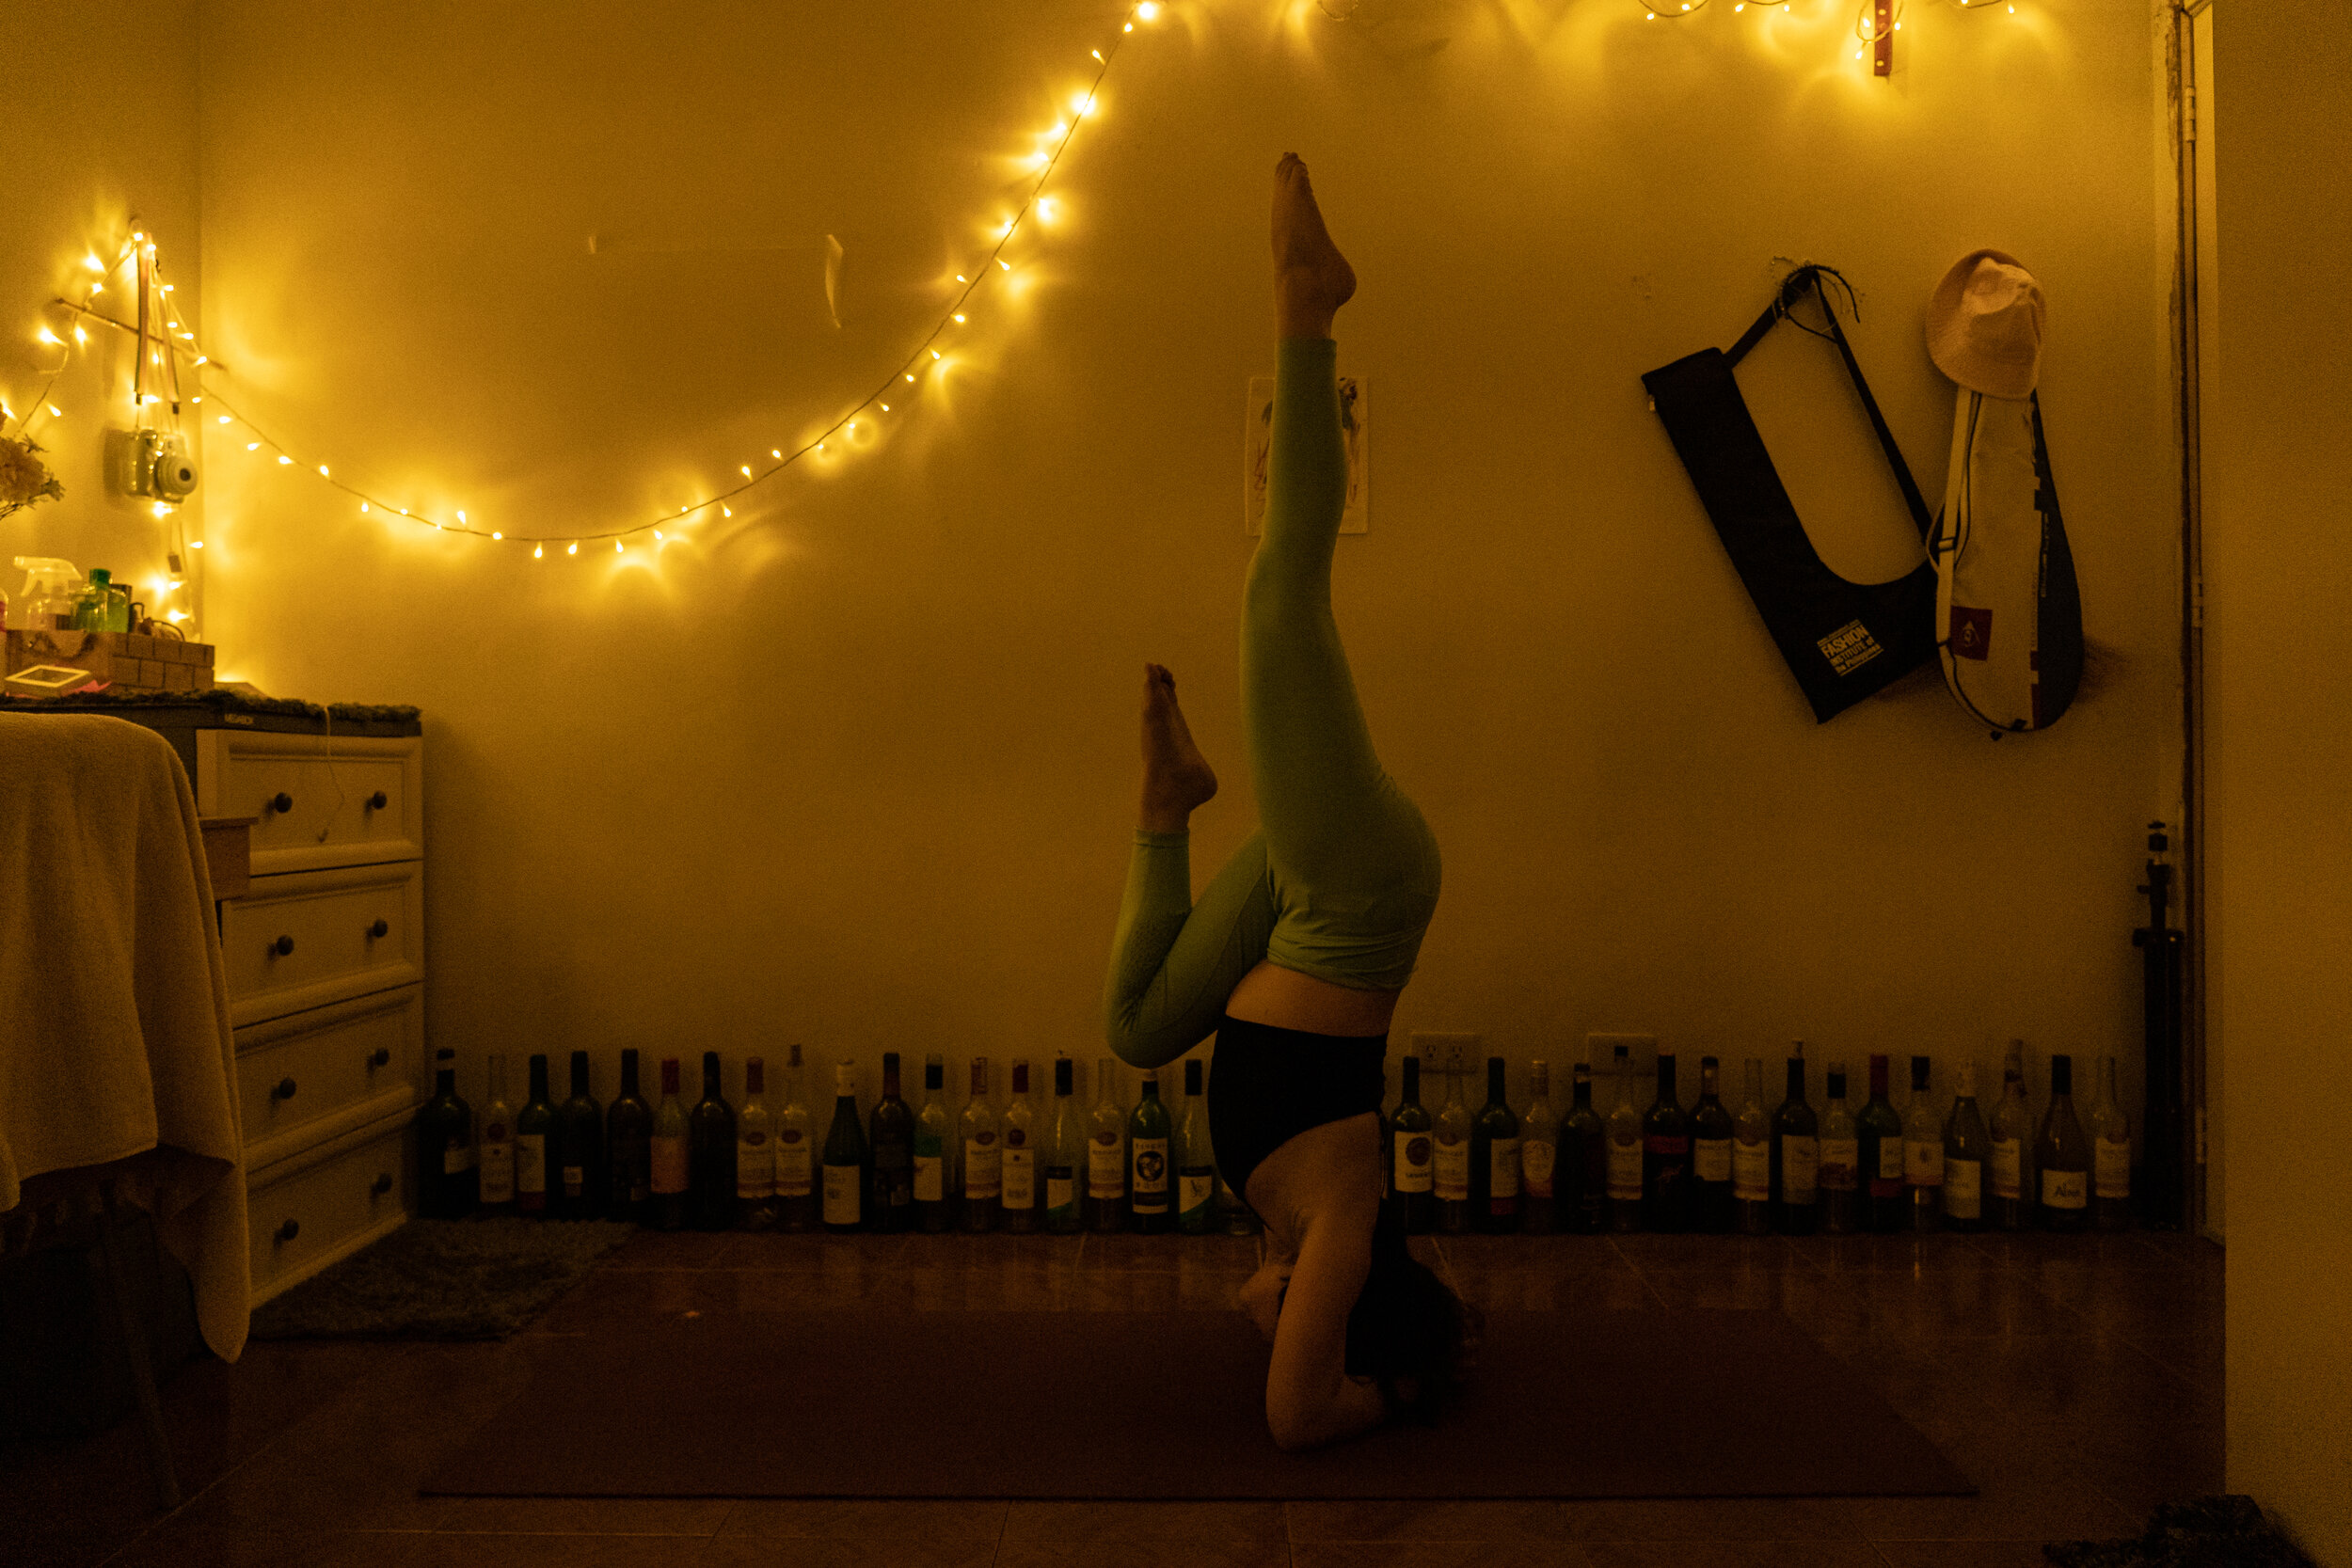  Karla Longjas, 27, does a headstand during meditative yoga inside her room, which is filled with bottles of alcohol. Apart from her medications, she practices yoga to have mental clarity, calmness, and stress relief. 